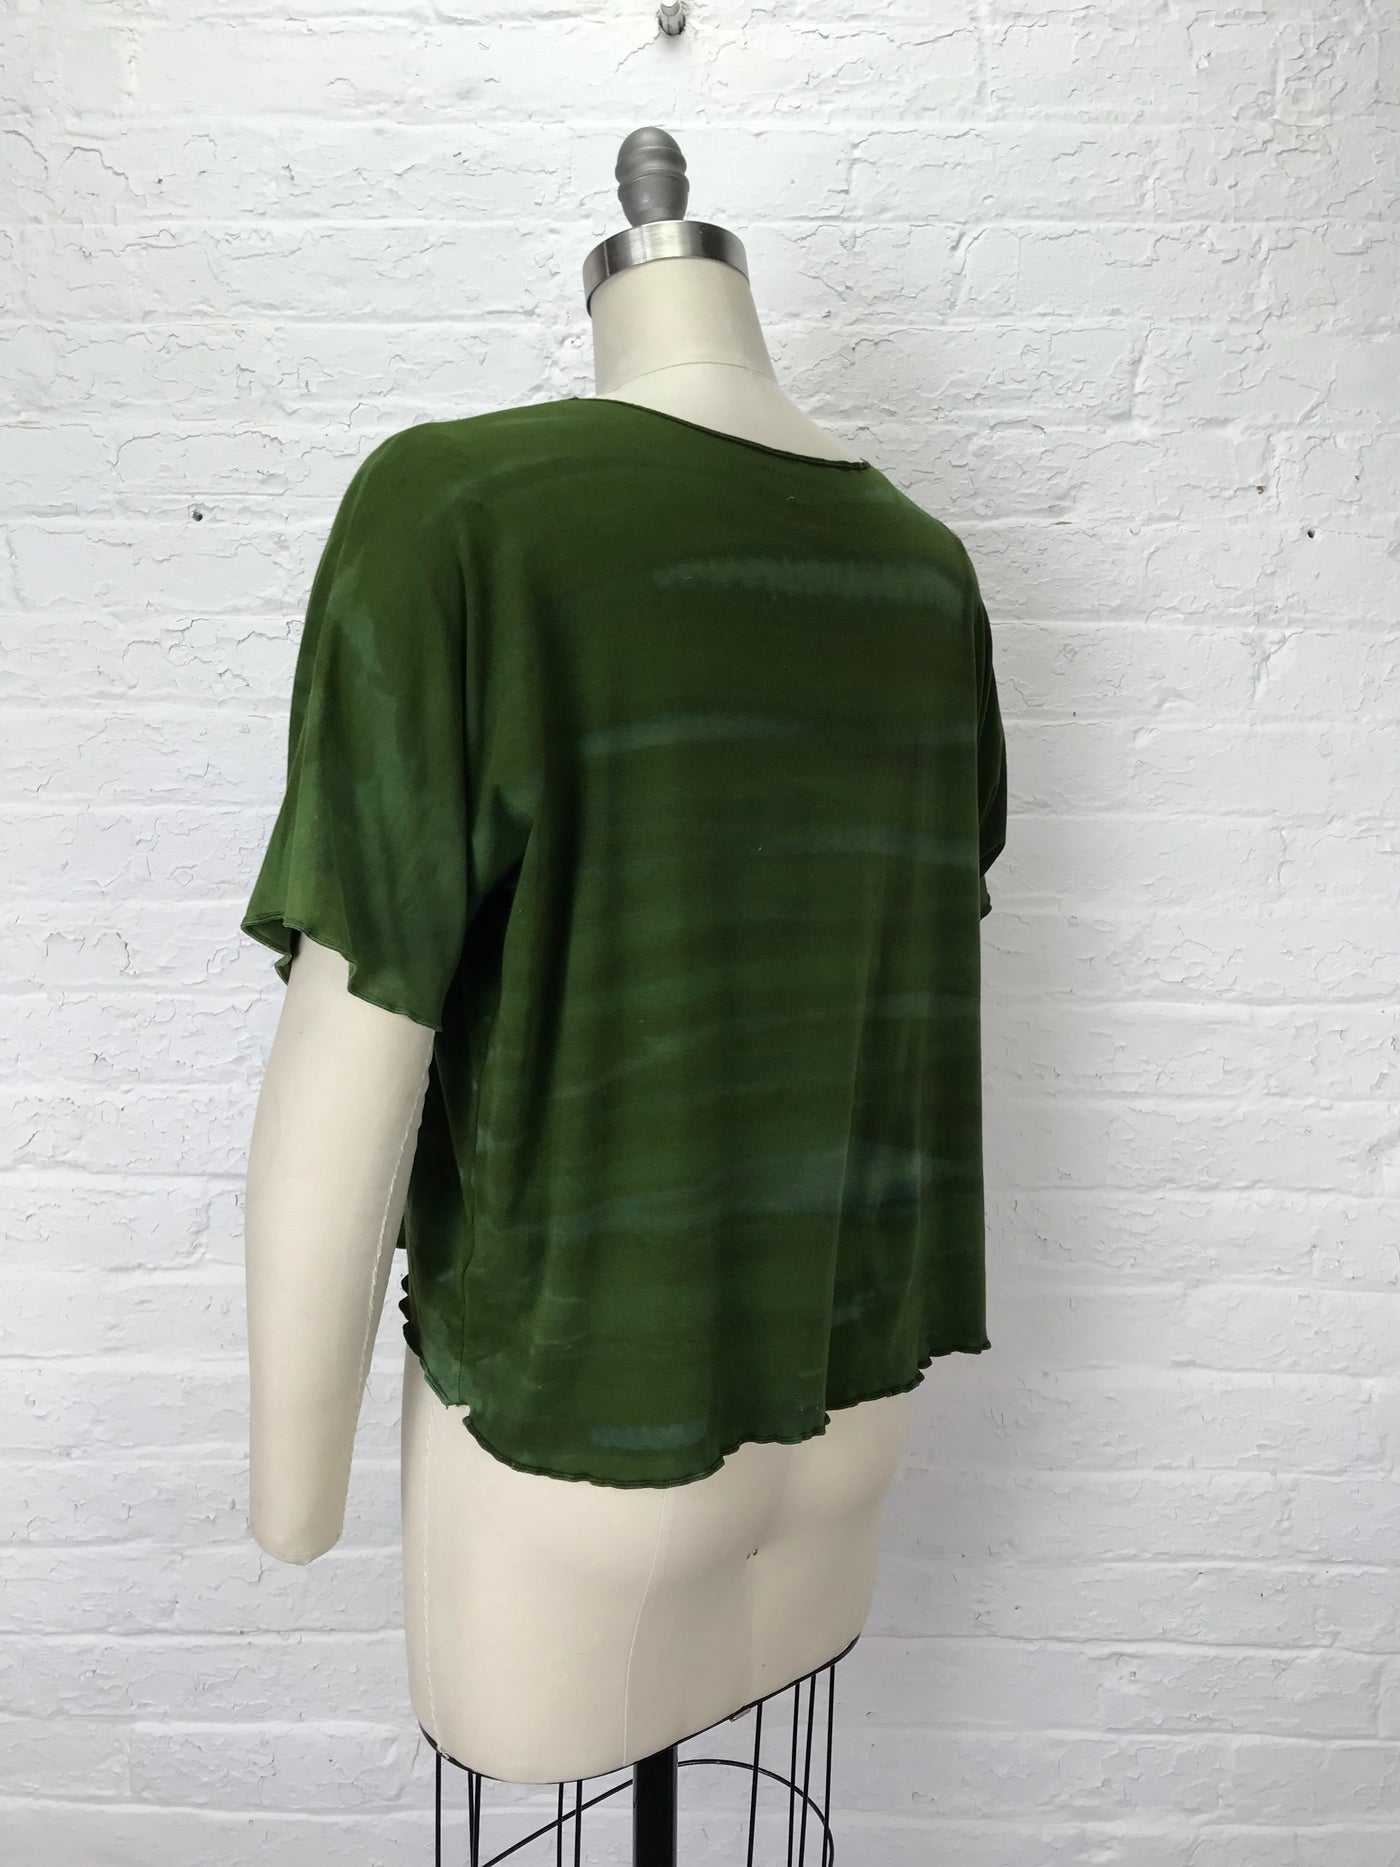 Juni Short Sleeve Top in Emerald Forest - One size